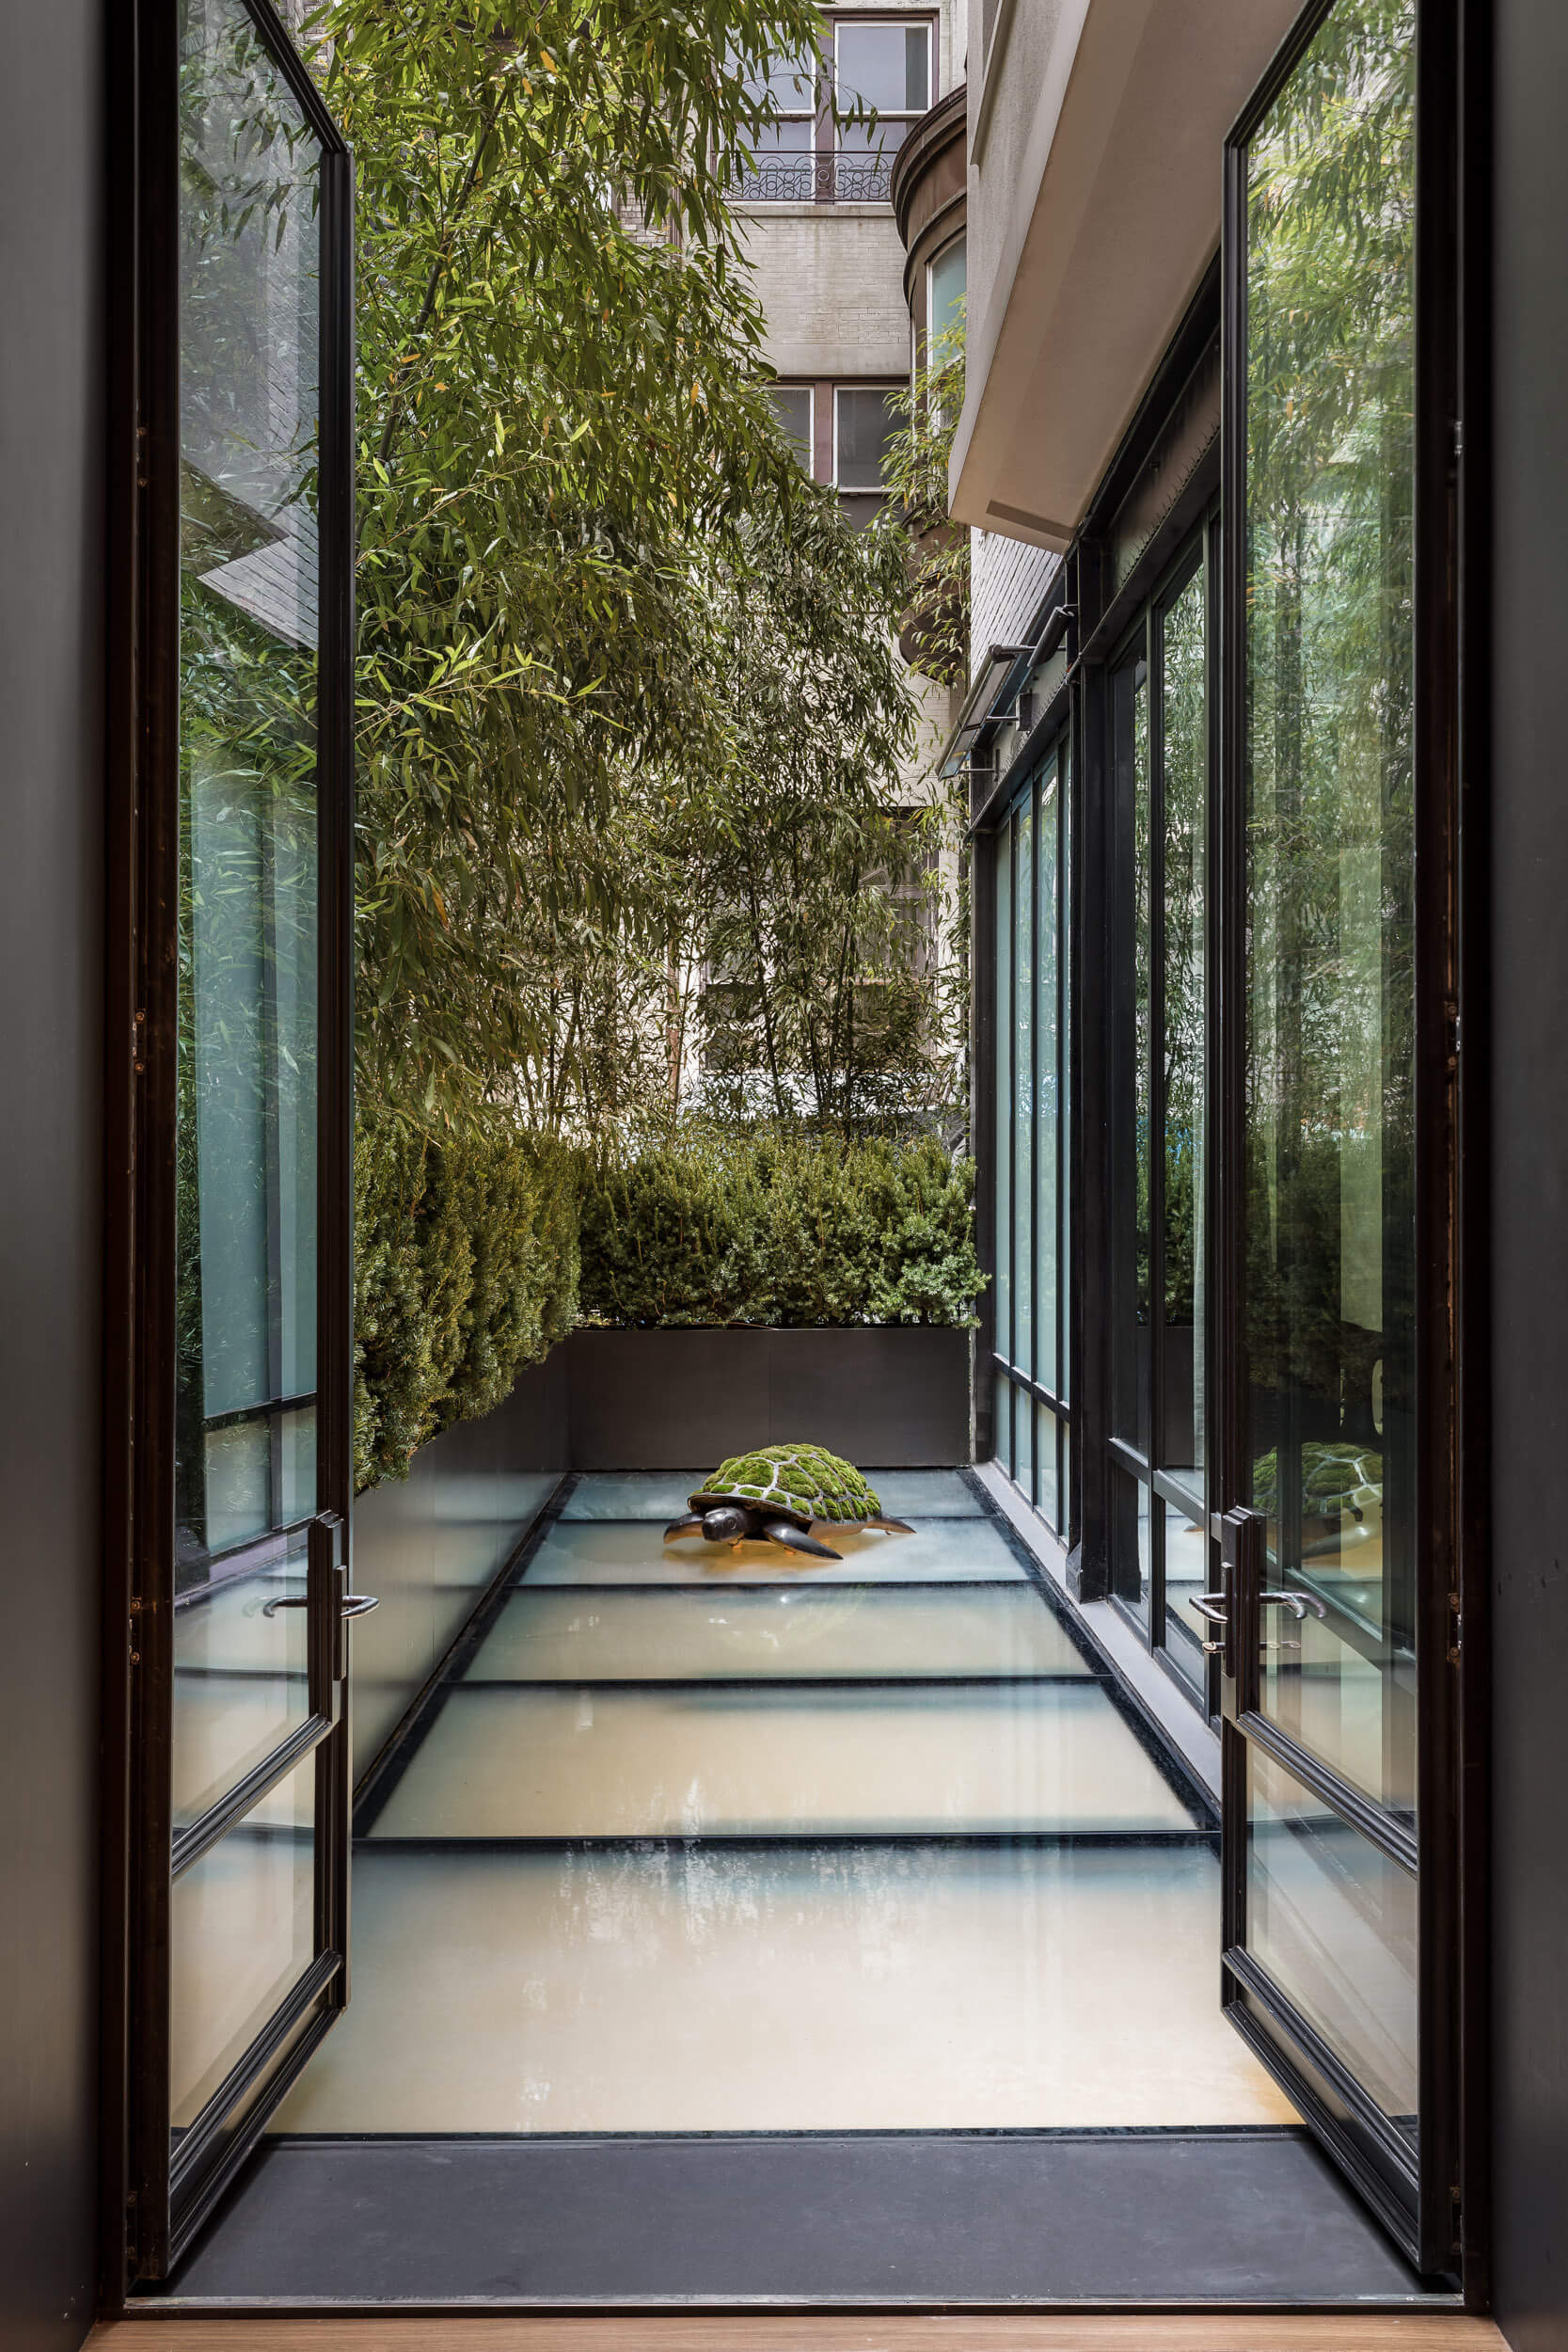 a New York City balcony with a glowing, opaque glass floor